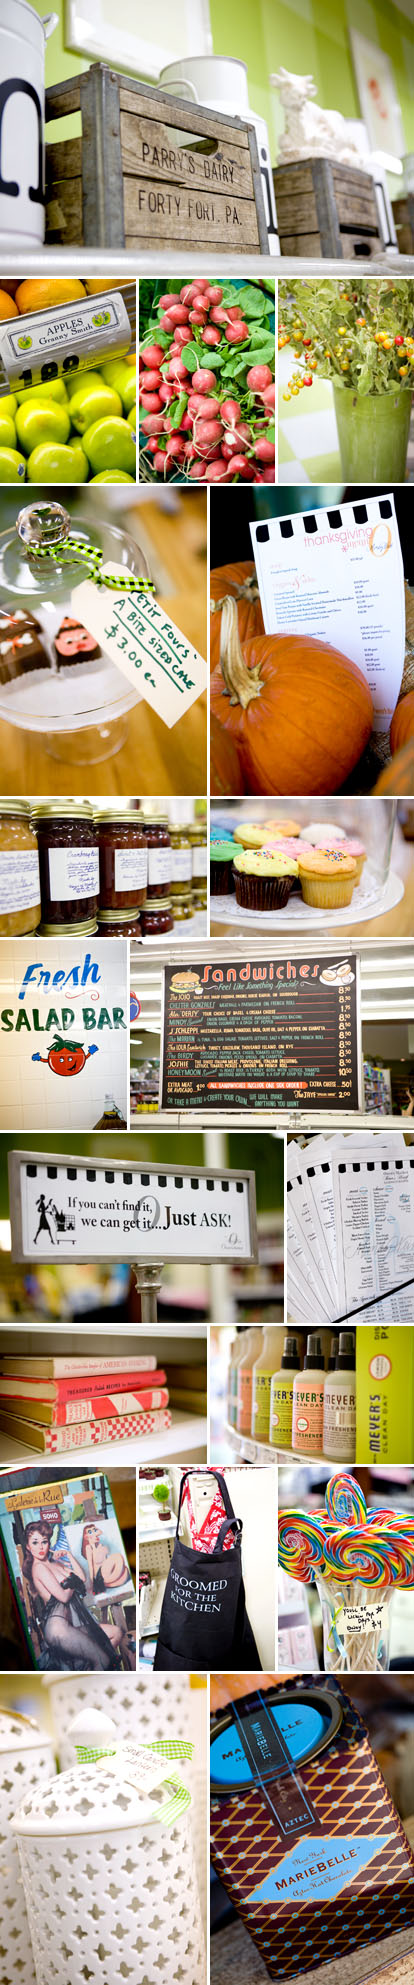 Owen's Market by Mindy Weiss, specialty foods and gifts, images by Junebug Weddings